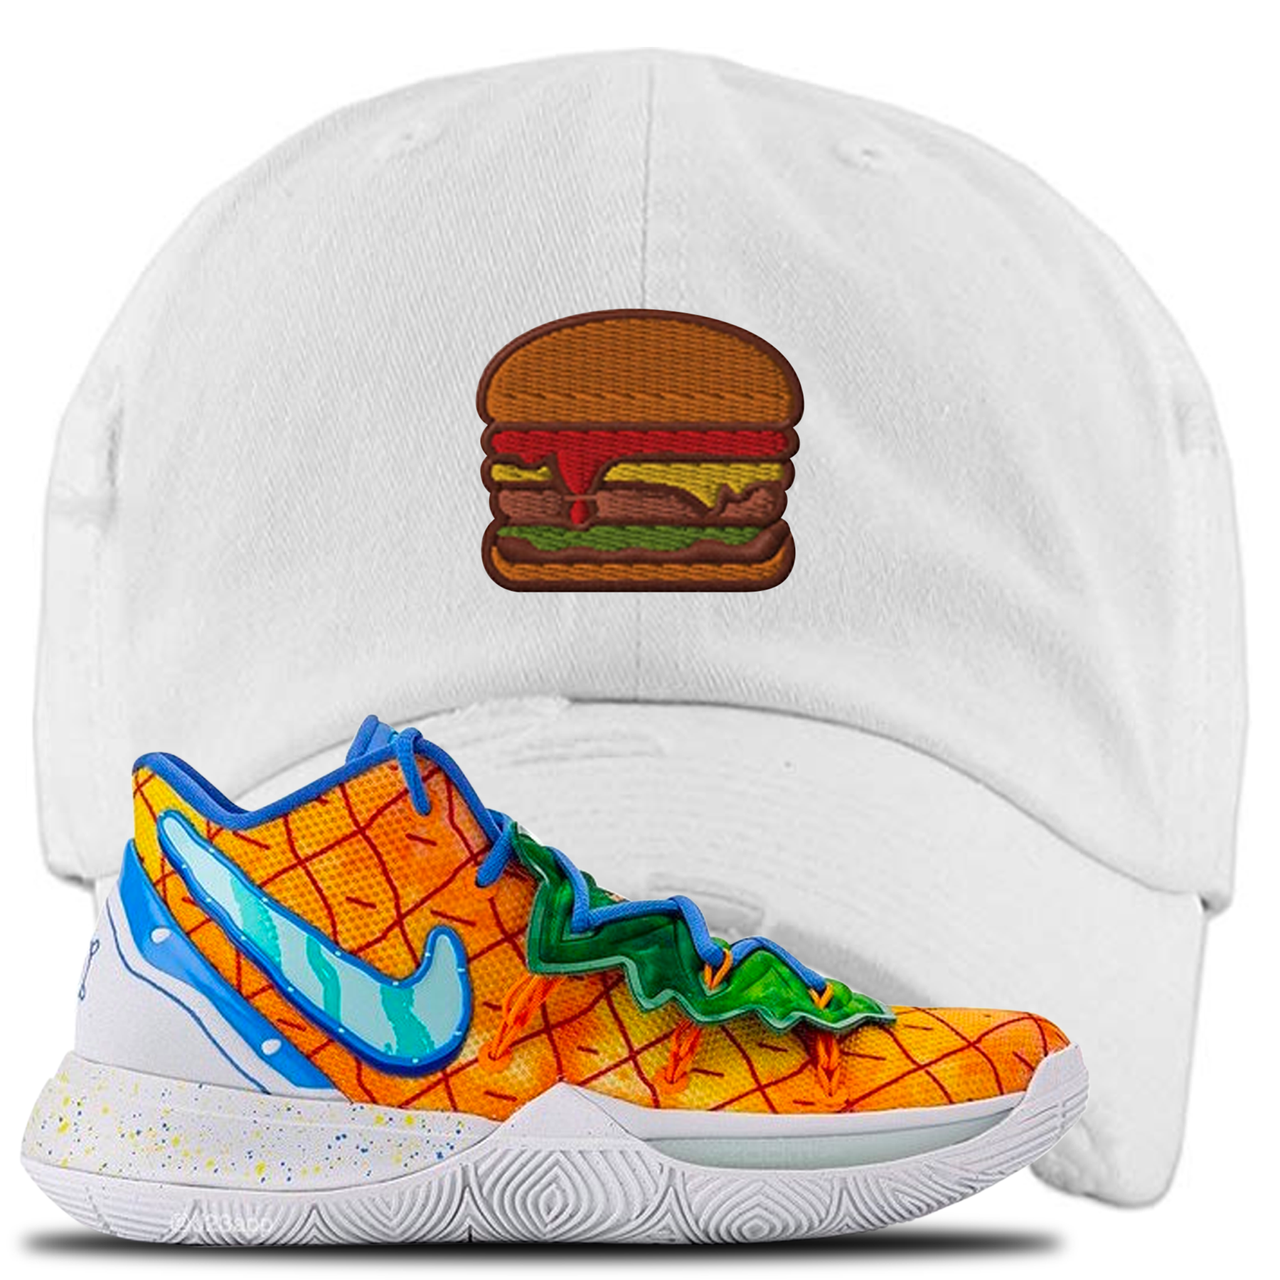 Kyrie 5 Pineapple House Burger White Sneaker Hook Up Distressed Dad Hat